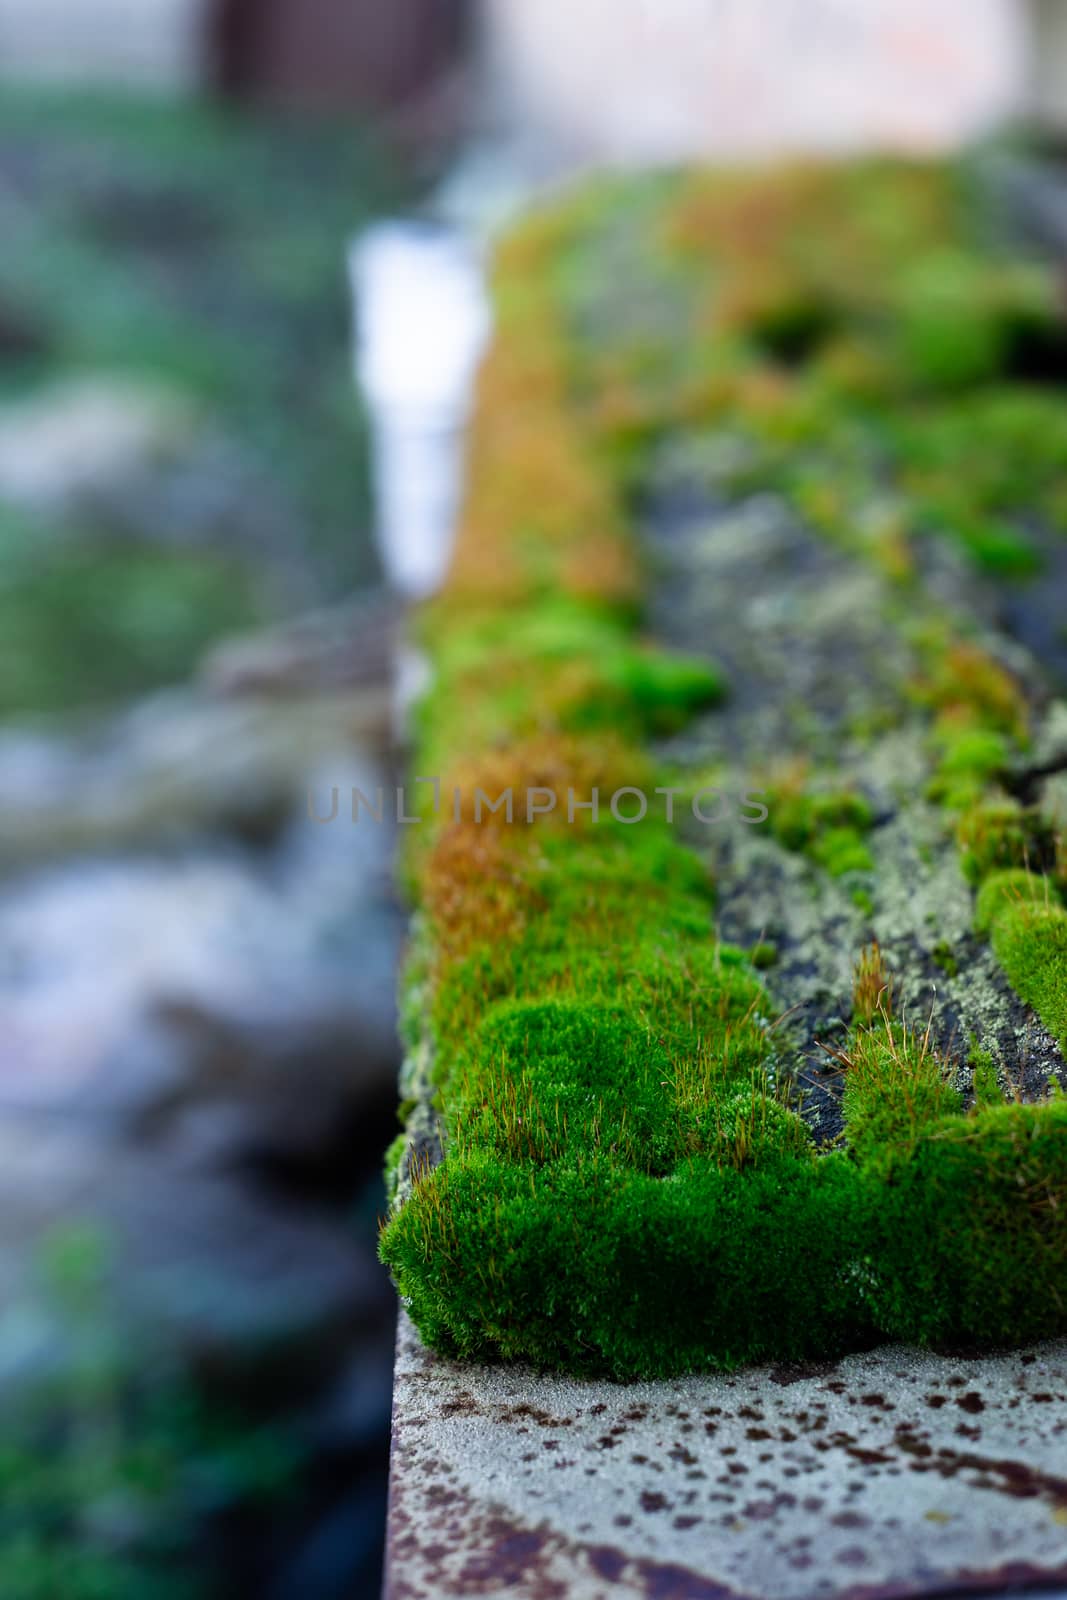 Hue green moss on wood bench surface. Wet wood and soft moss. Blurred background. Soft focus. by alexsdriver